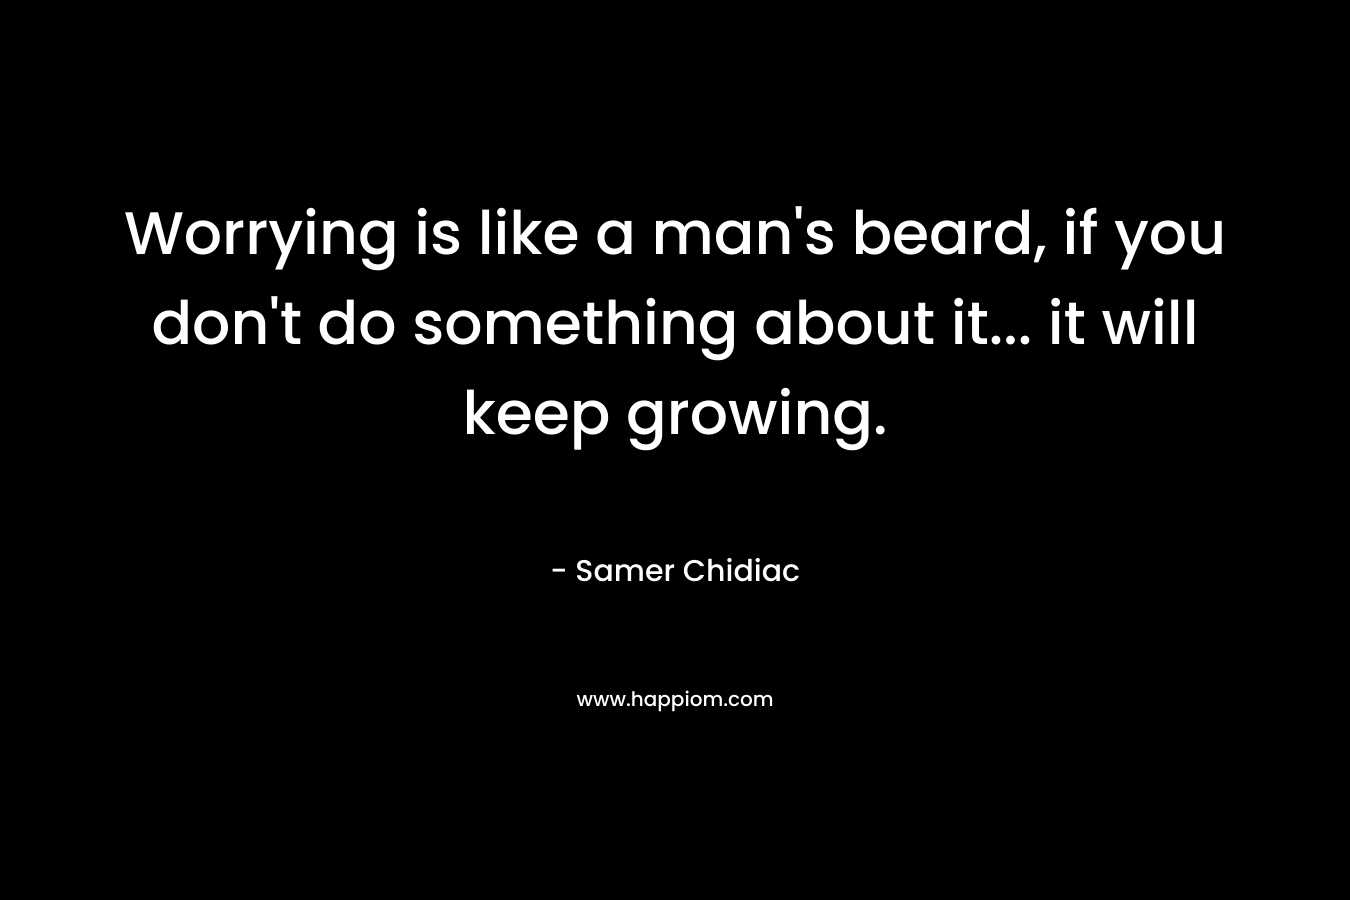 Worrying is like a man's beard, if you don't do something about it... it will keep growing.